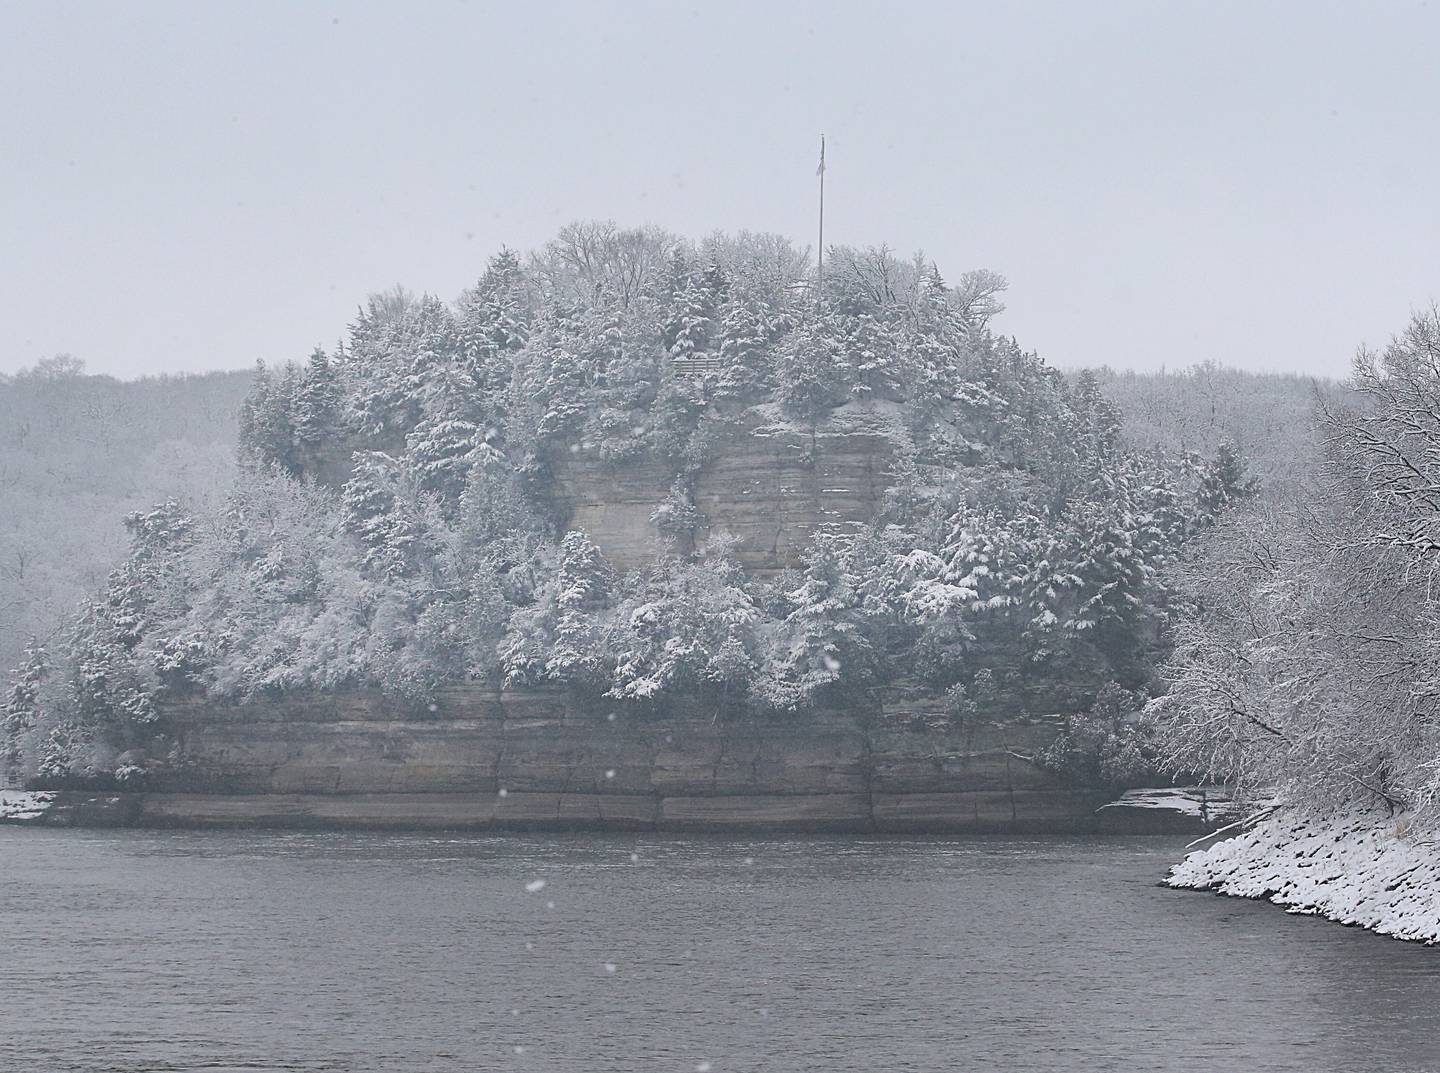 The famous Starved Rock landmark blanketed in snow cover rises magnificently over the Illinois River on Wednesday, Jan. 25, 2023 near Utica.